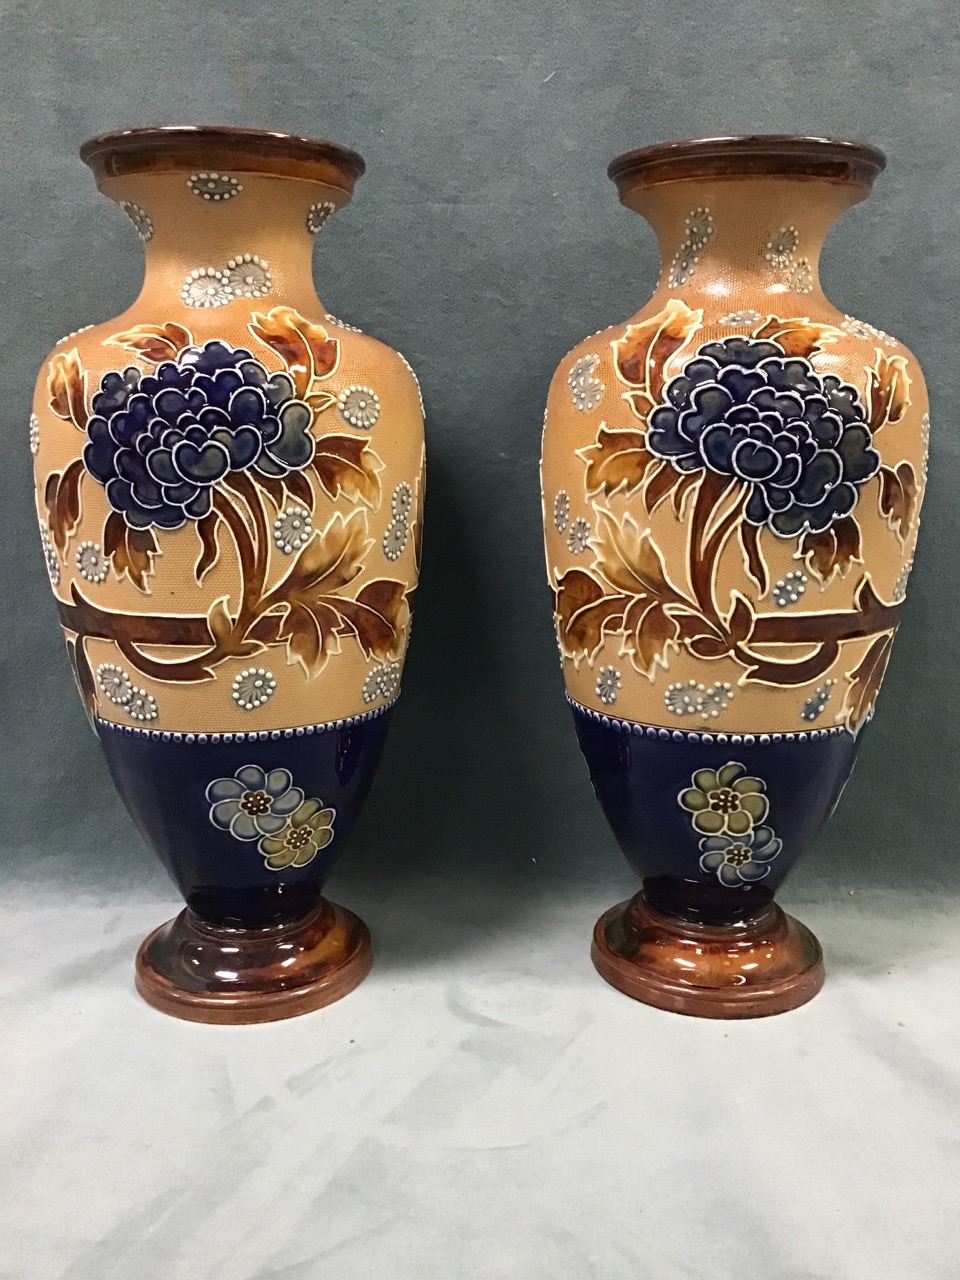 A pair of Doulton Lambeth stoneware vases, with tubelined decoration of peonies and flowerheads by